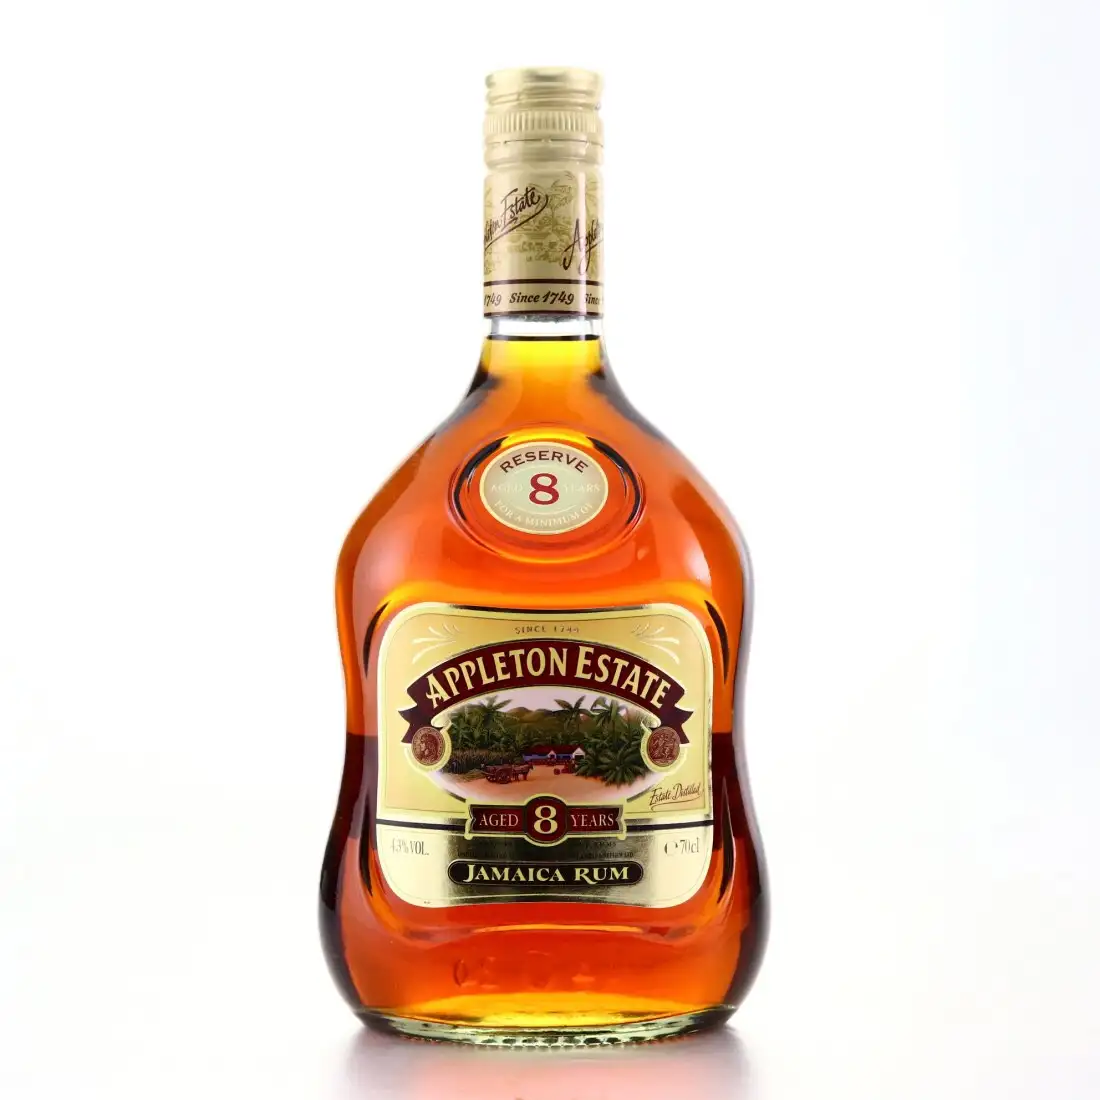 Image of the front of the bottle of the rum Reserve 8 Years